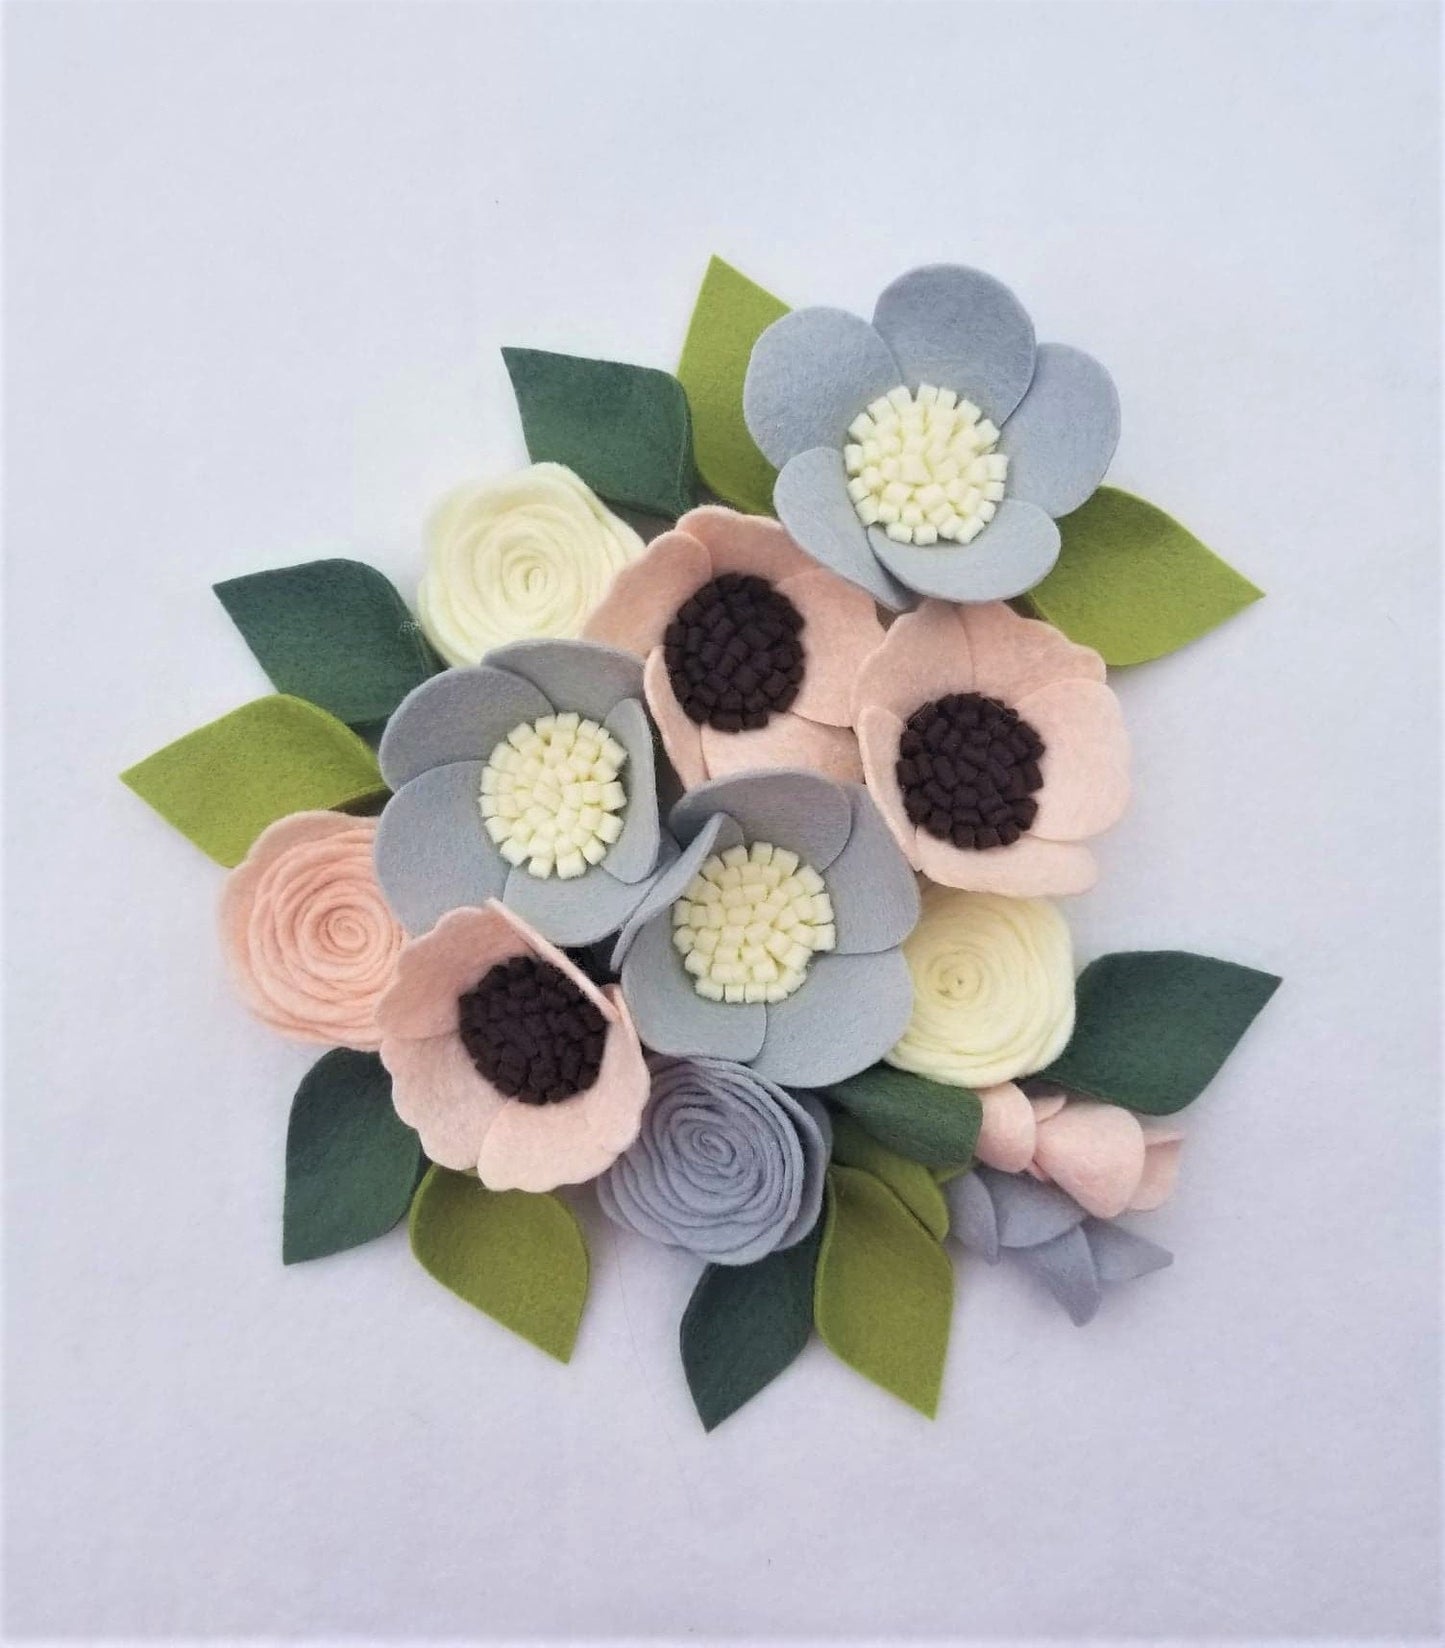 How To Make Felt Flowers - Molly and Mama